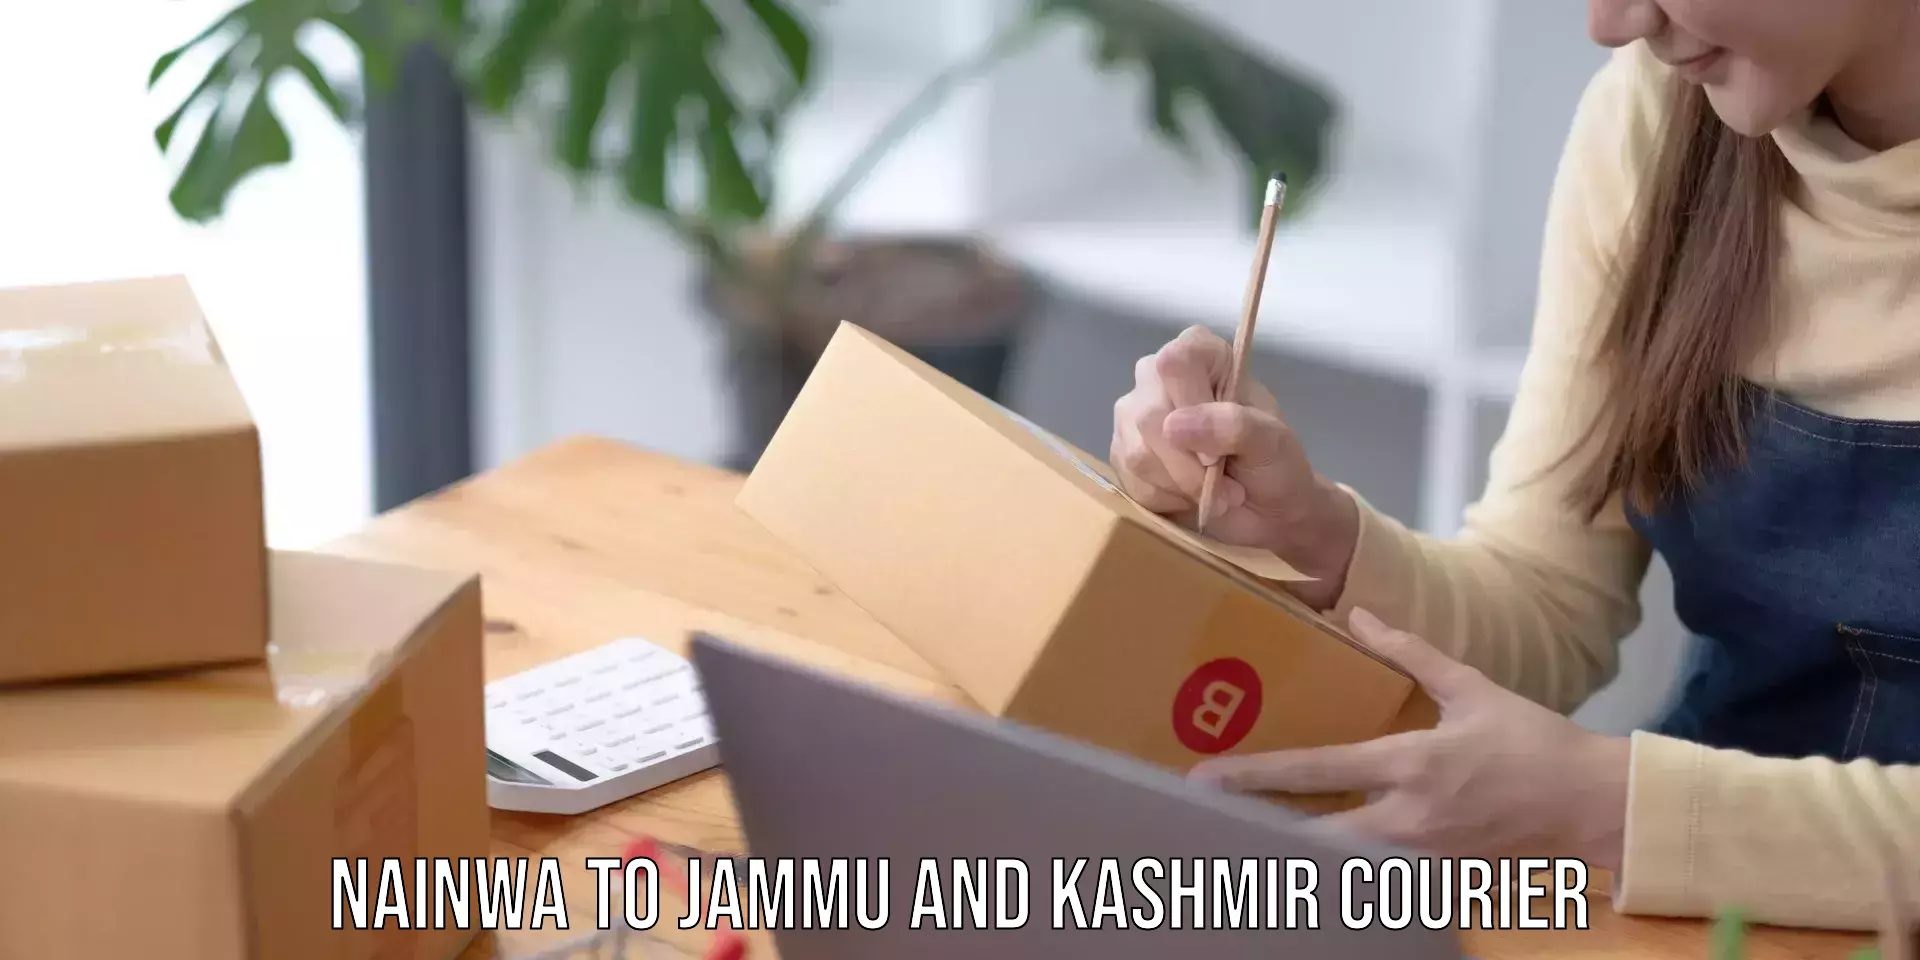 User-friendly delivery service Nainwa to Jammu and Kashmir